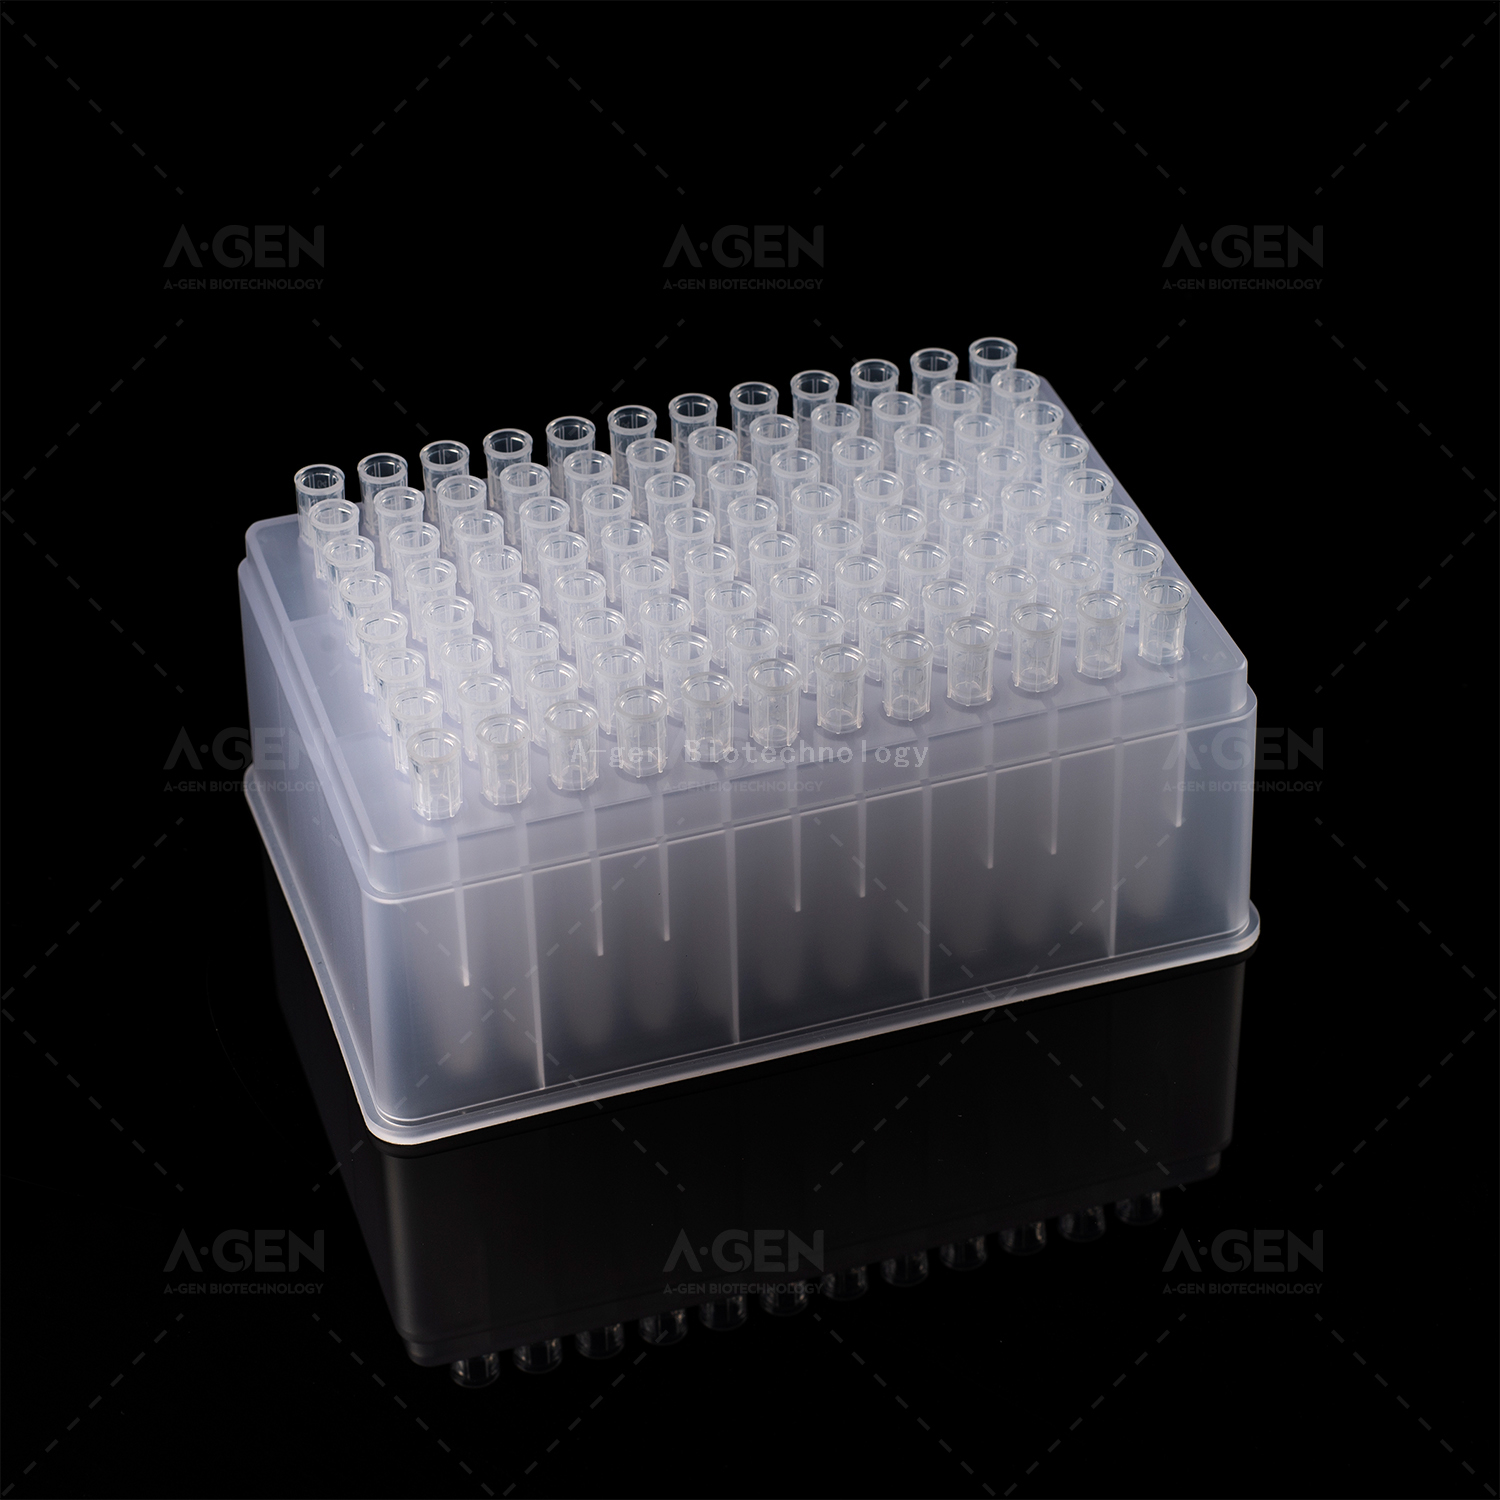 BECKMAN 50μL Clear Robotic PP Pipette Tip (Racked,sterilized) for Liquid Transfer No Filter FX-50-RSL Low Residual